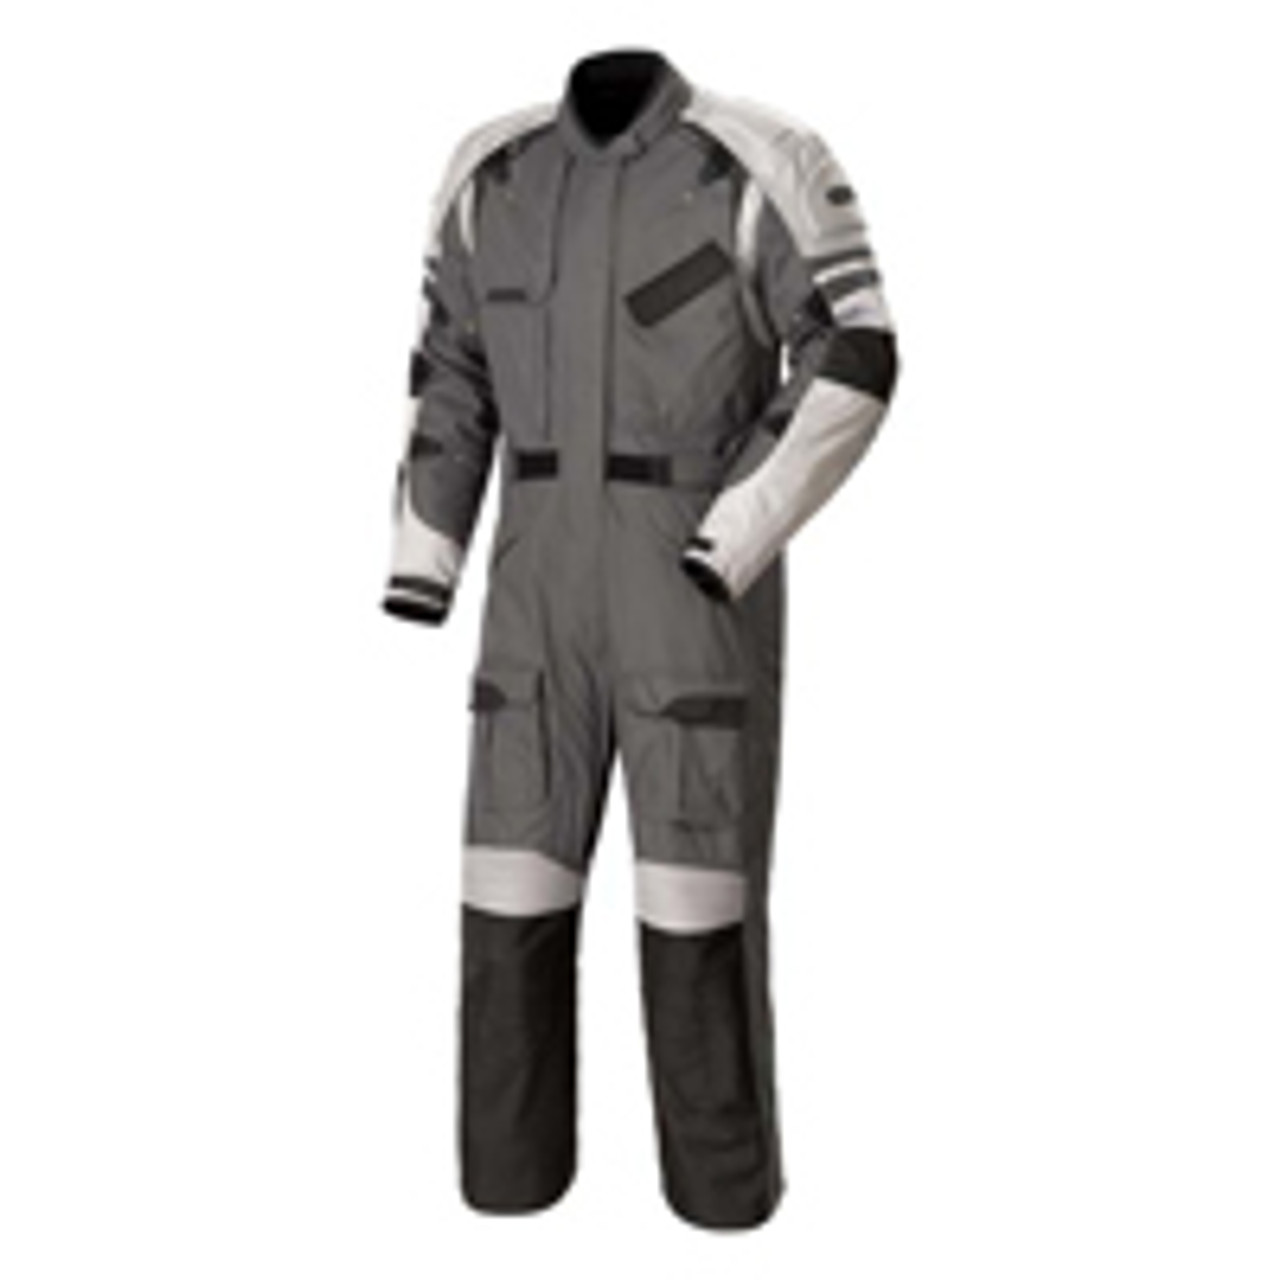 Motorcycle Riding Suits | Riding Suit For Motorcycle